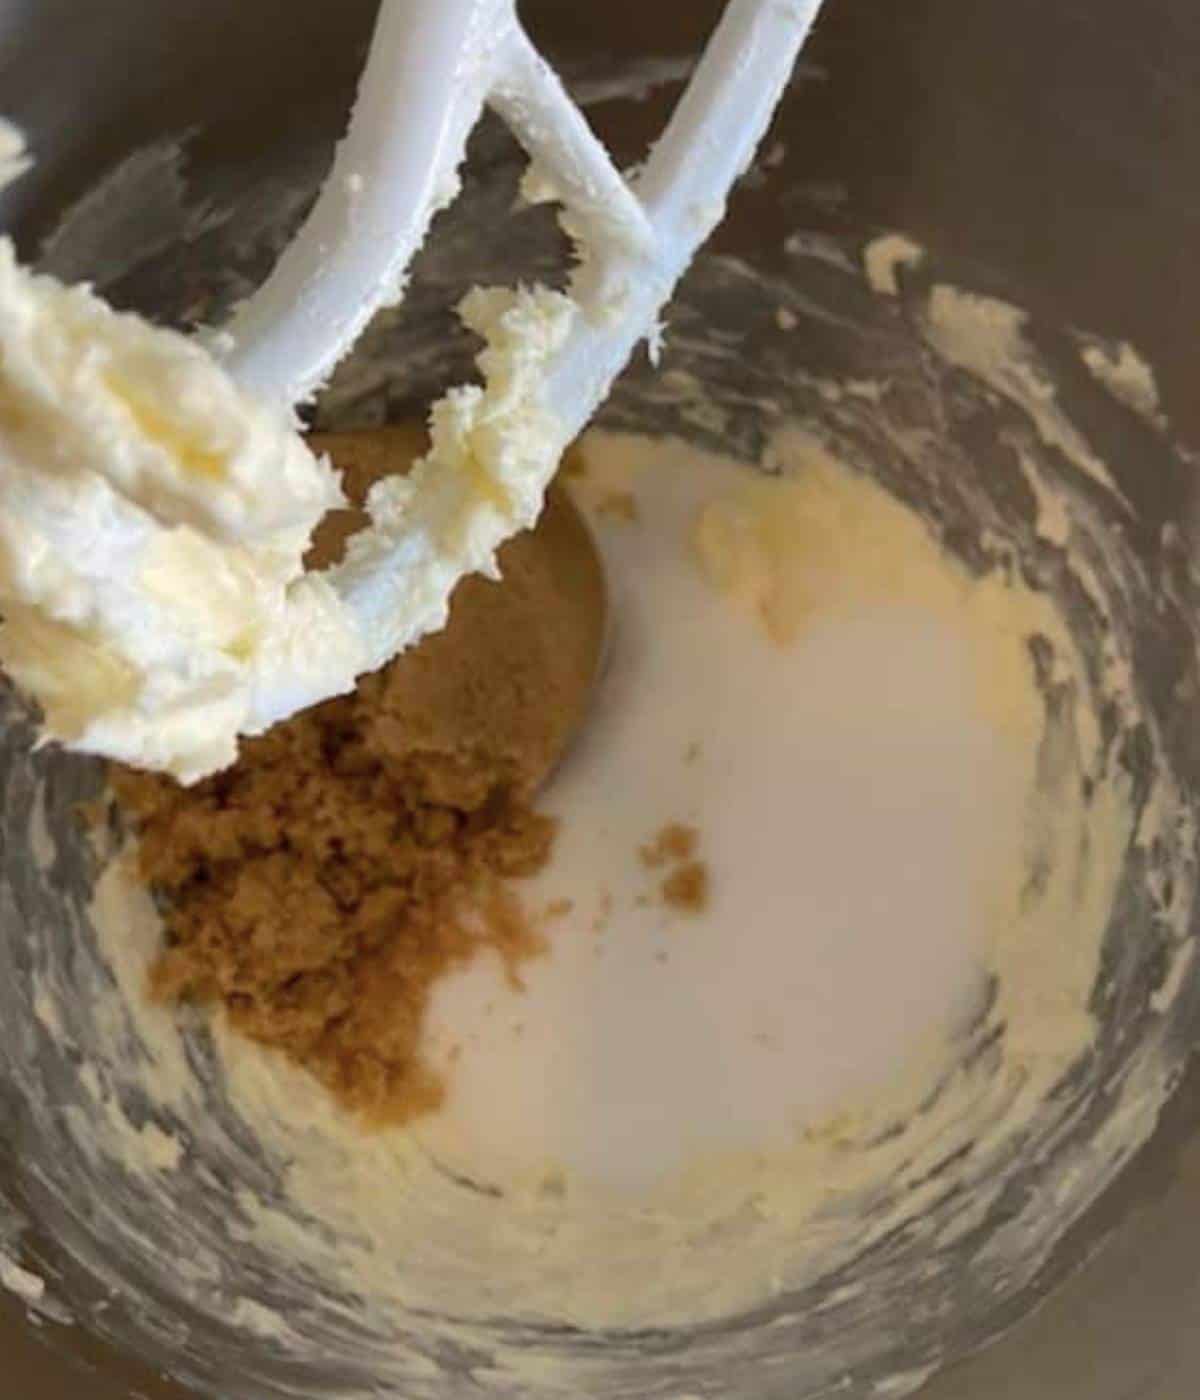 Creaming butter and sugars in stand mixer.